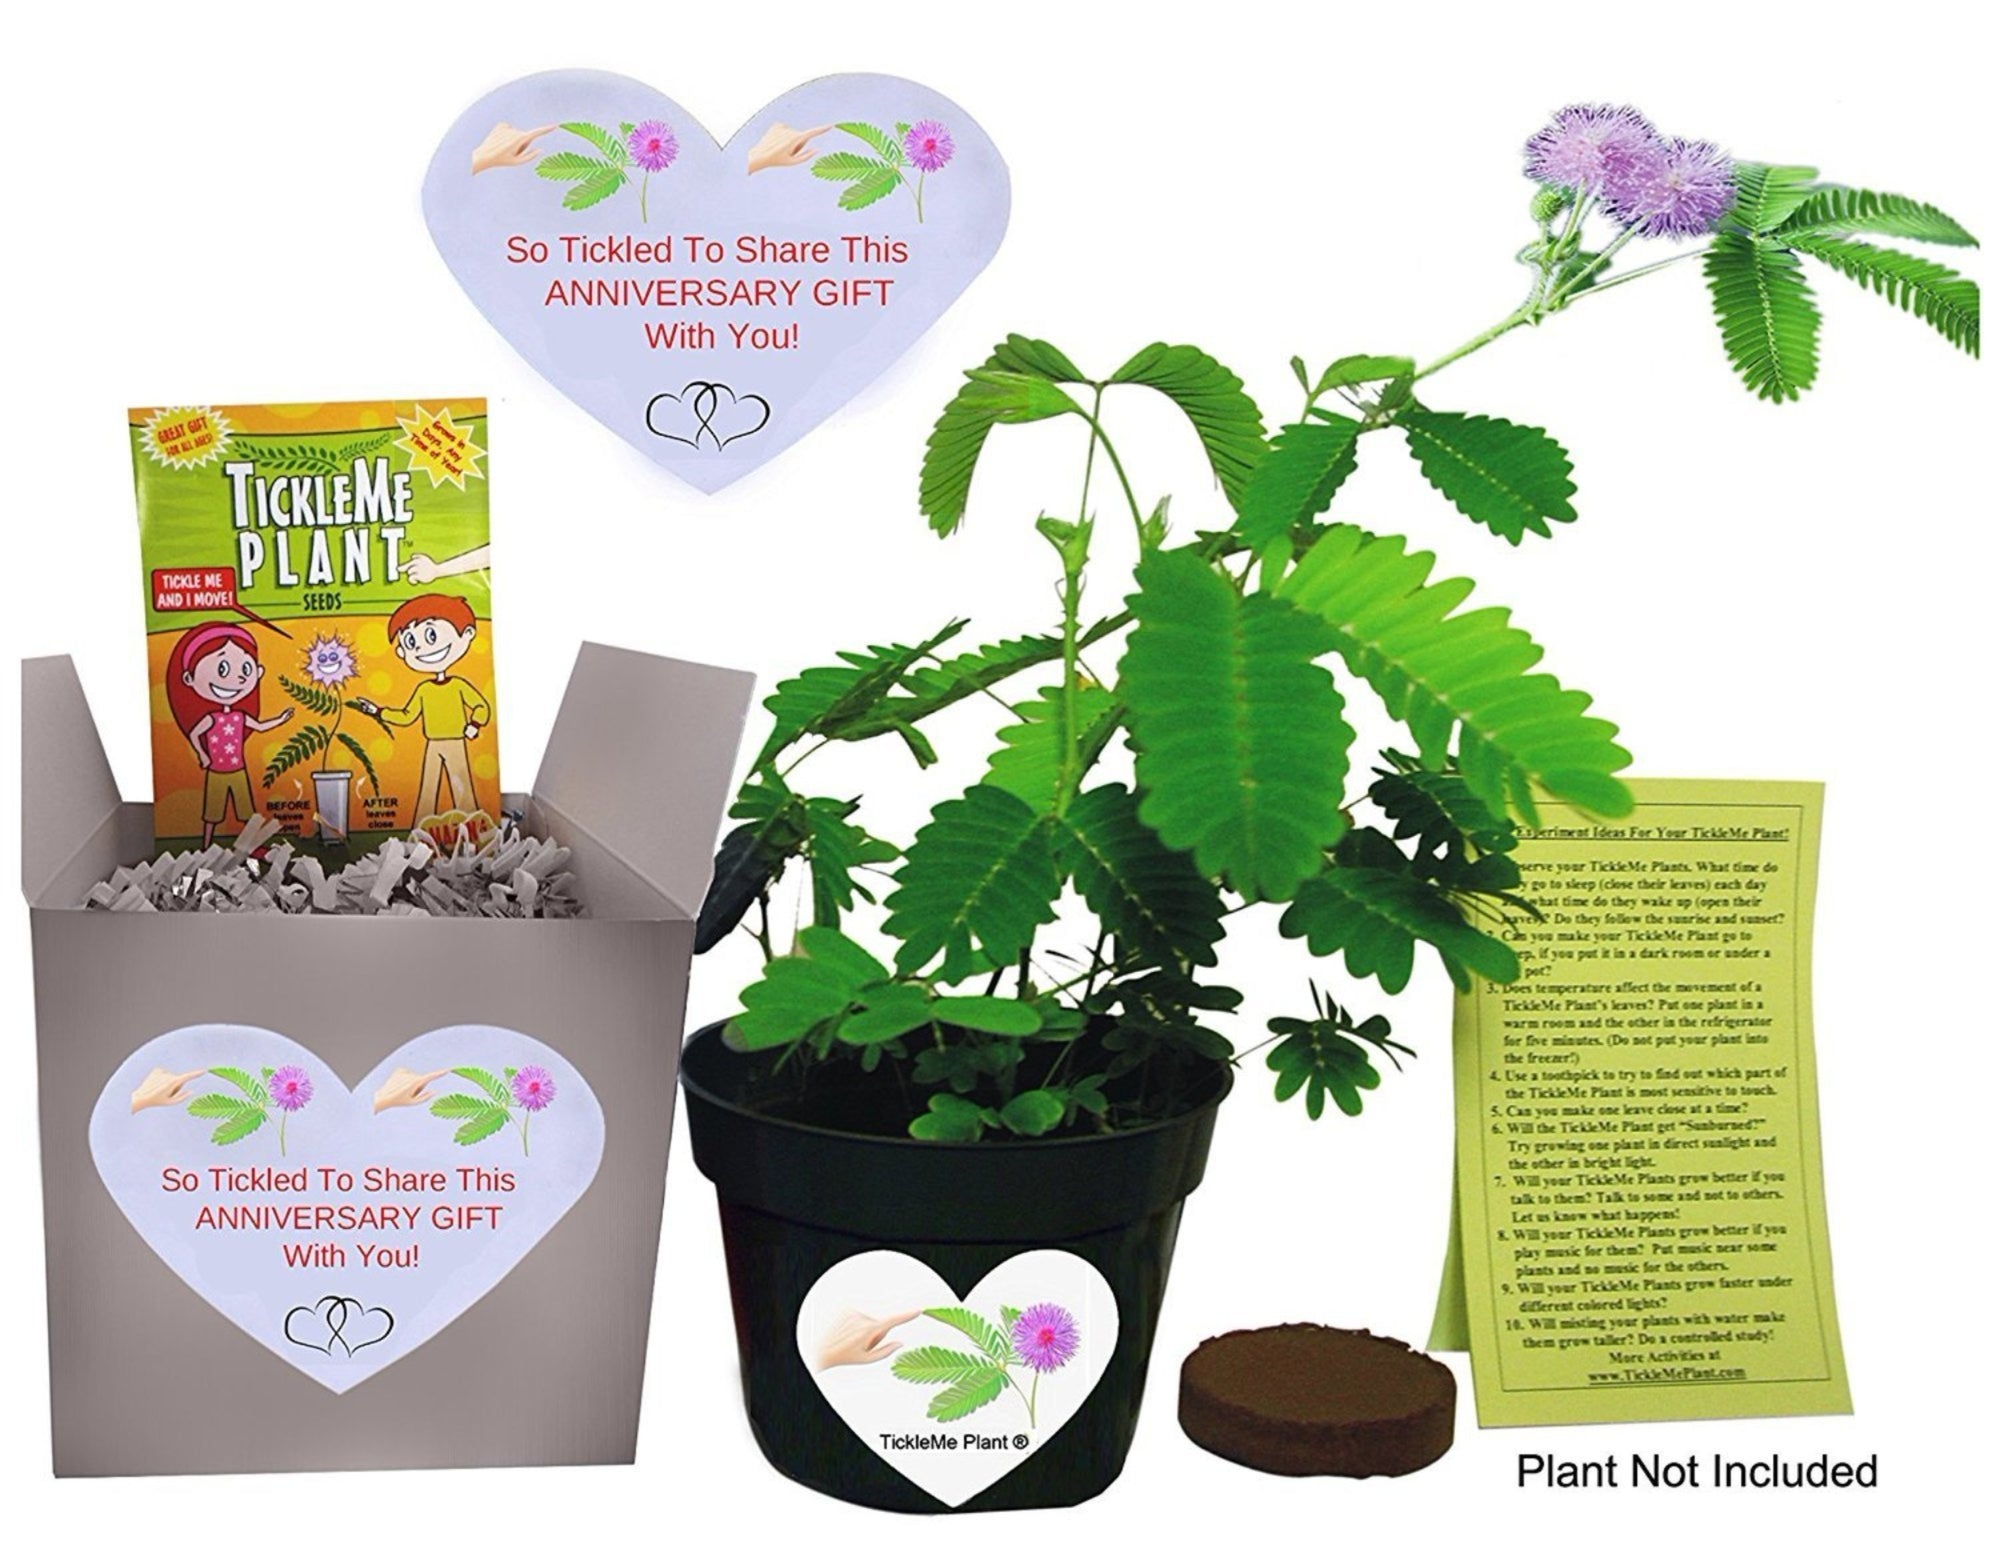 TickleMe Plant Anniversary Gift Box Set - To grow the TickleMe Plant that closes its leaves and lowers its branches when Tickled